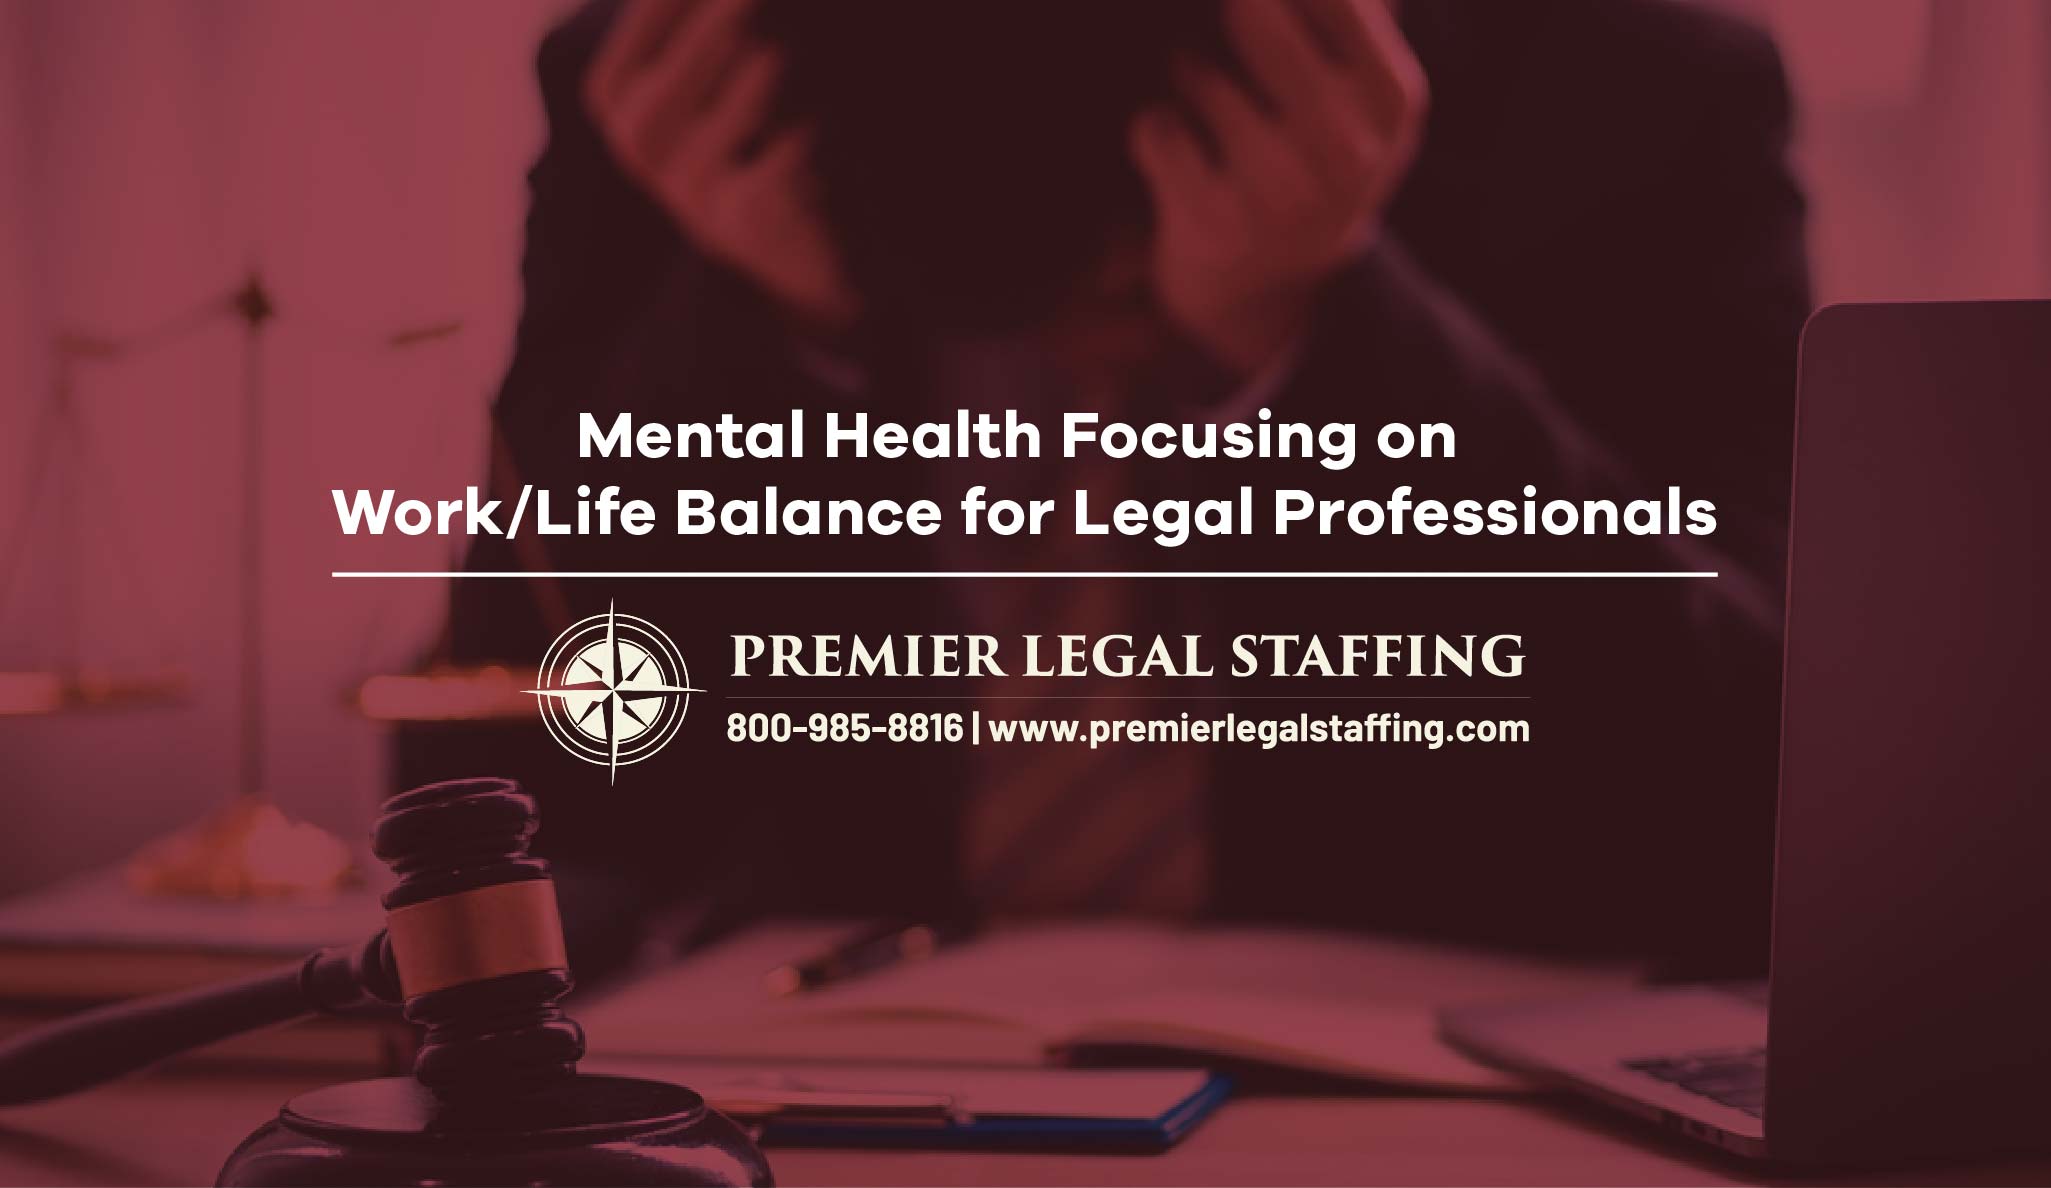 Mental Health Focusing on Work/Life Balance for Legal Professionals